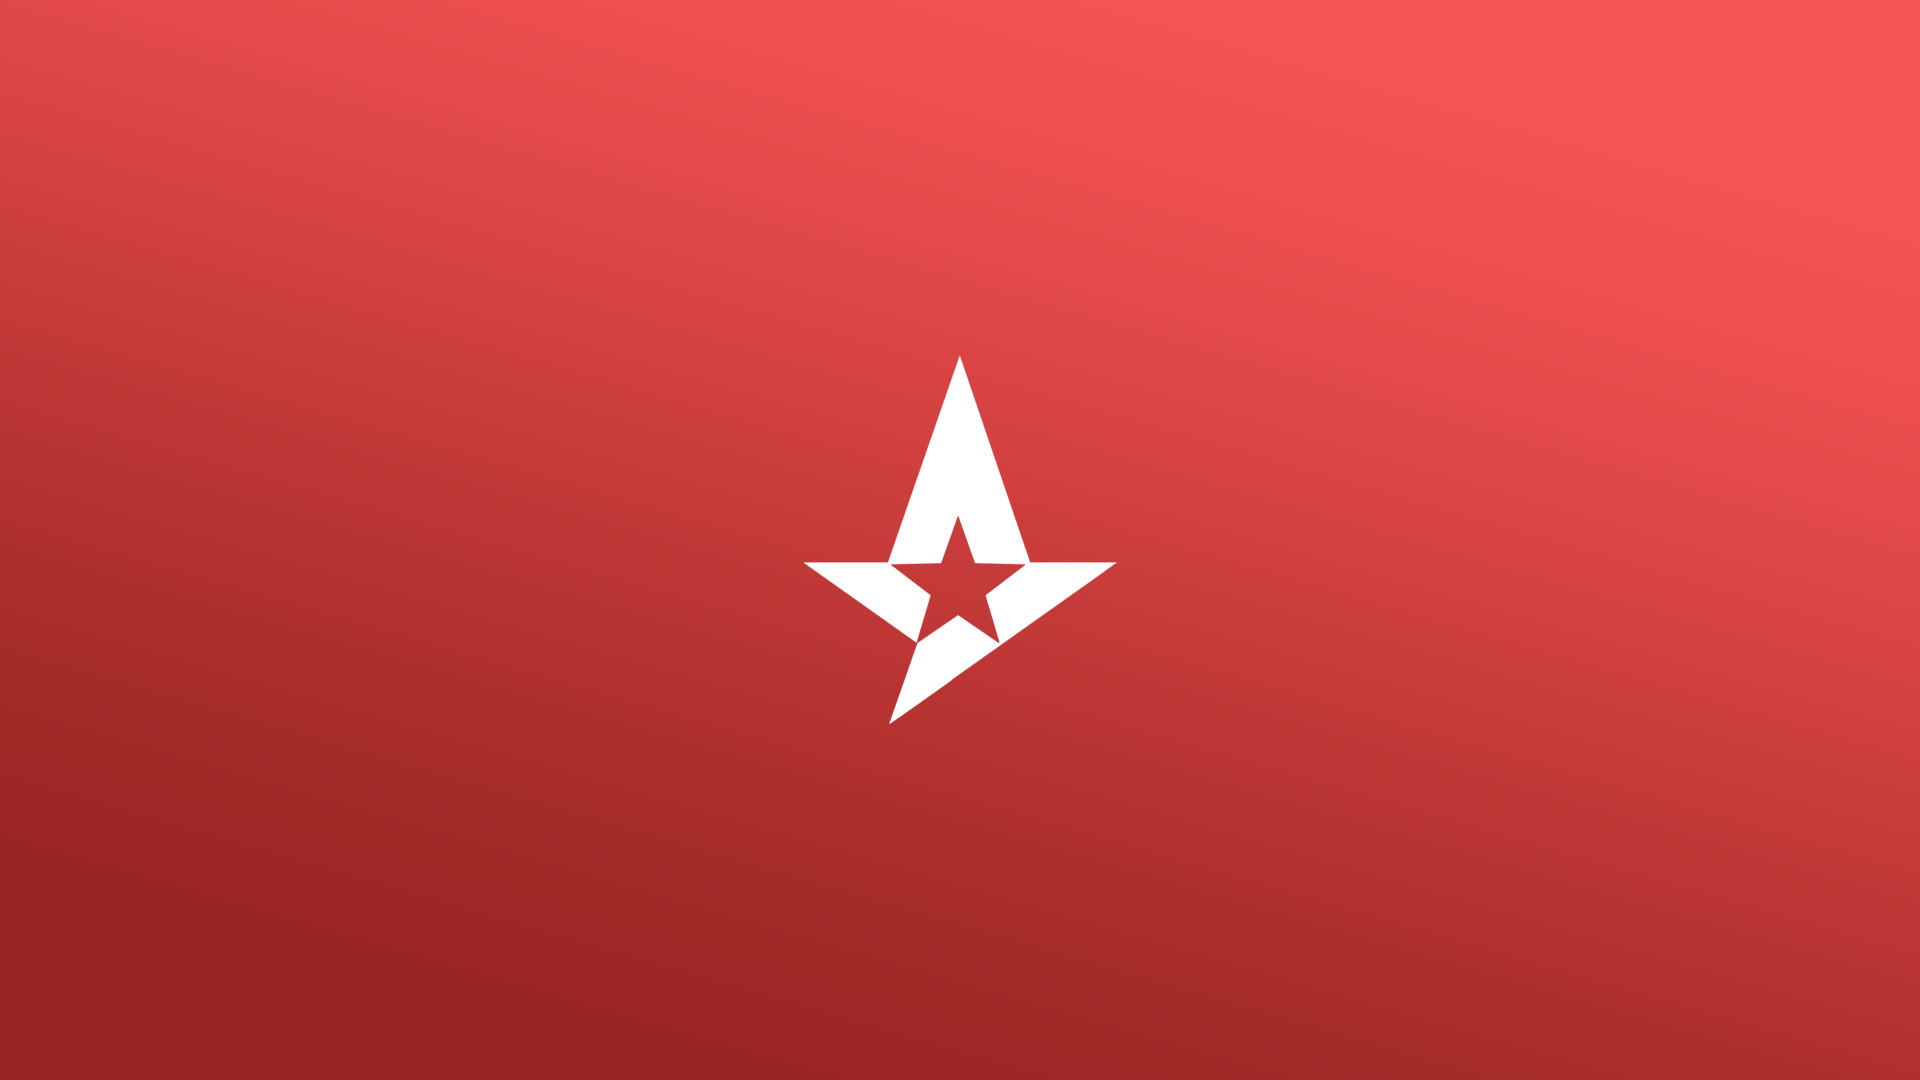 Astralis are a Danish organisation specialising in CSGO created by the players. Here are some cool Astralis wallpapers that you can download and set as your